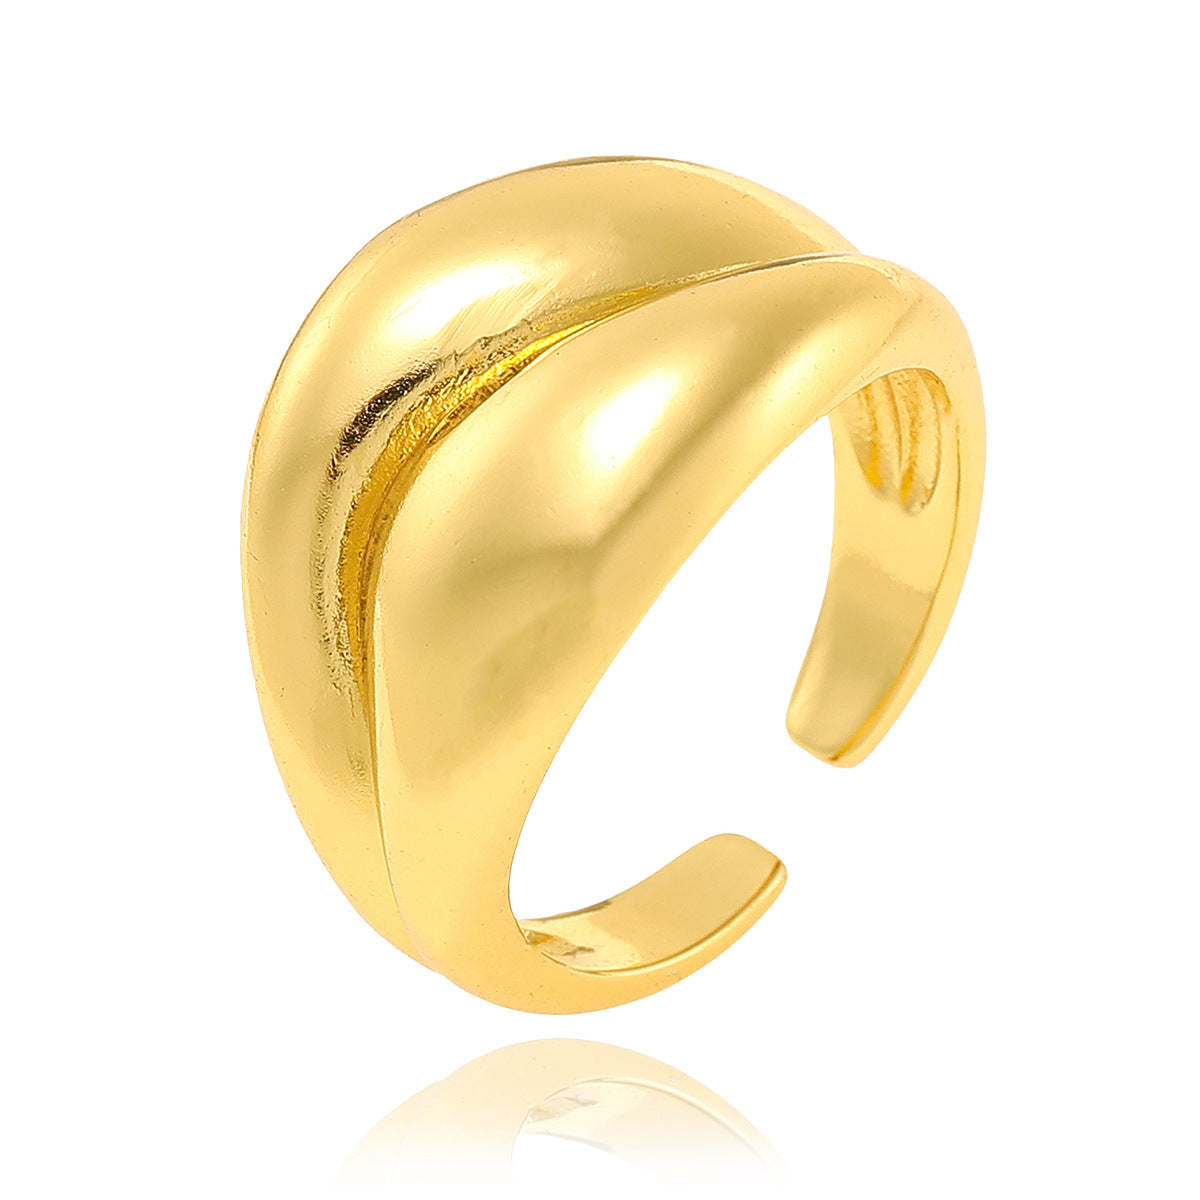 Commuter Ring Women's Copper Plating 18K Gold-plated Ring Adjustable